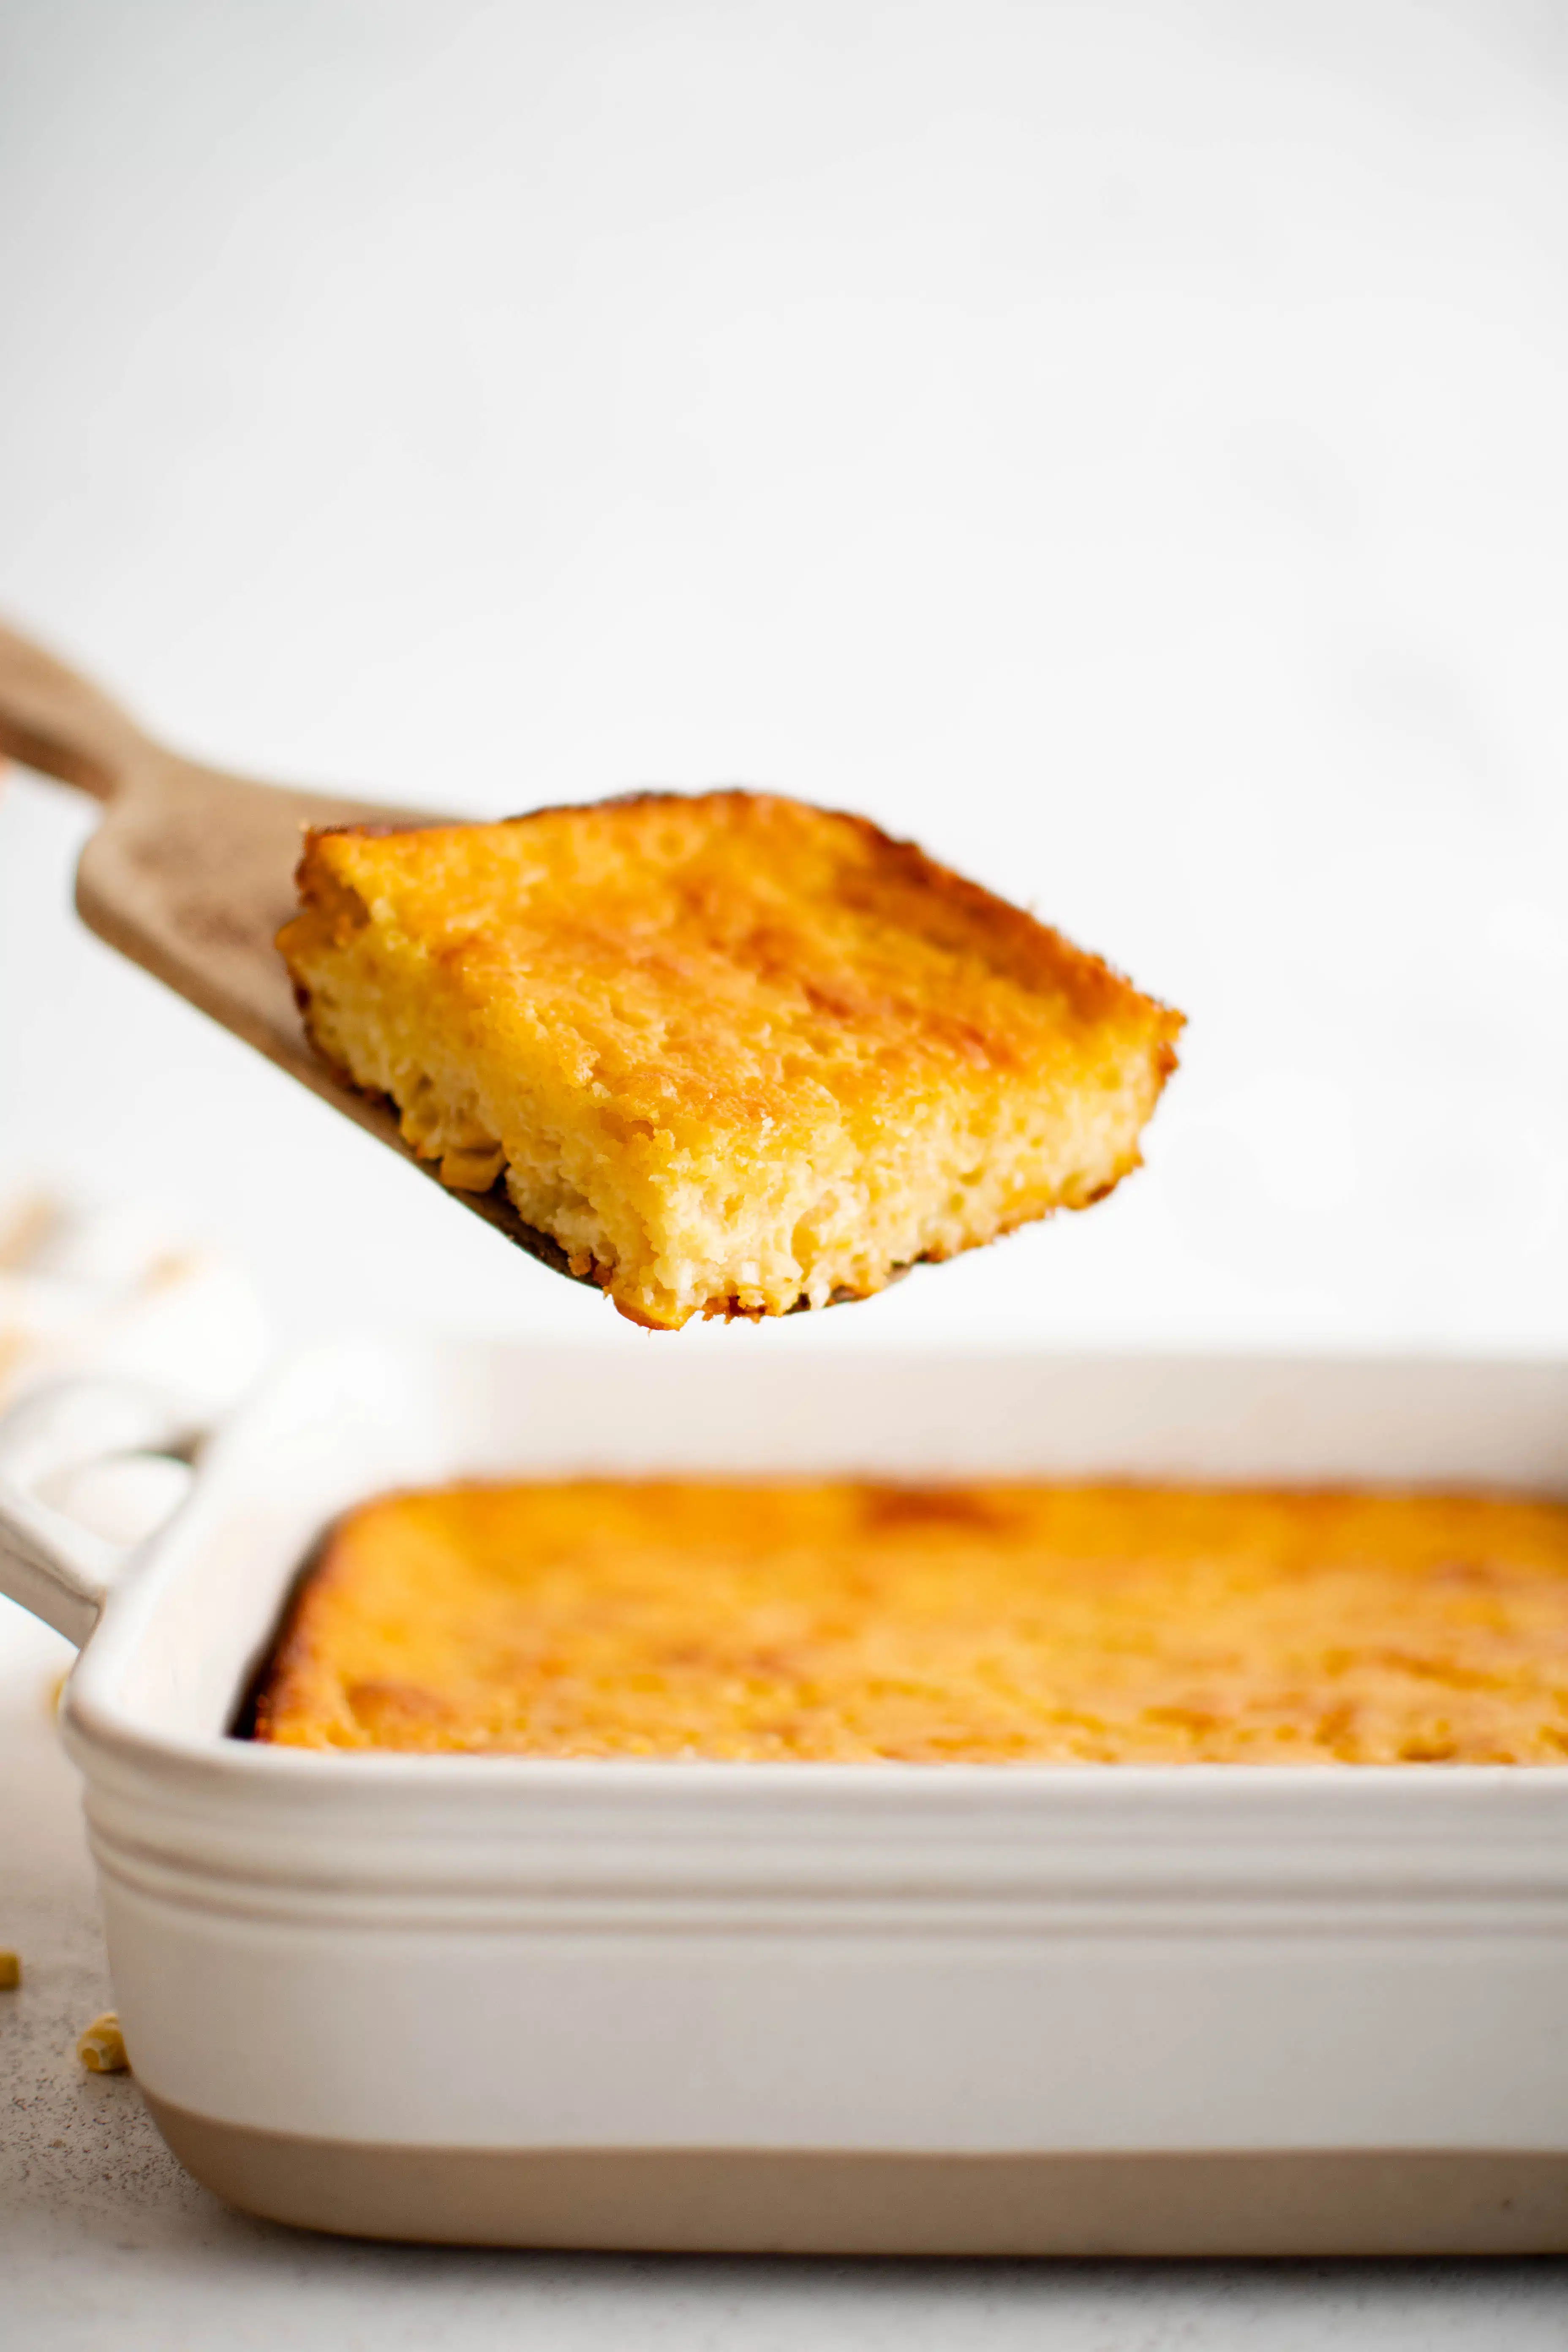 Wooden spatula holding a square of cooked cornbread casserole hovering above a white baking dish filled with golden brown baked cornbread casserole recipe.